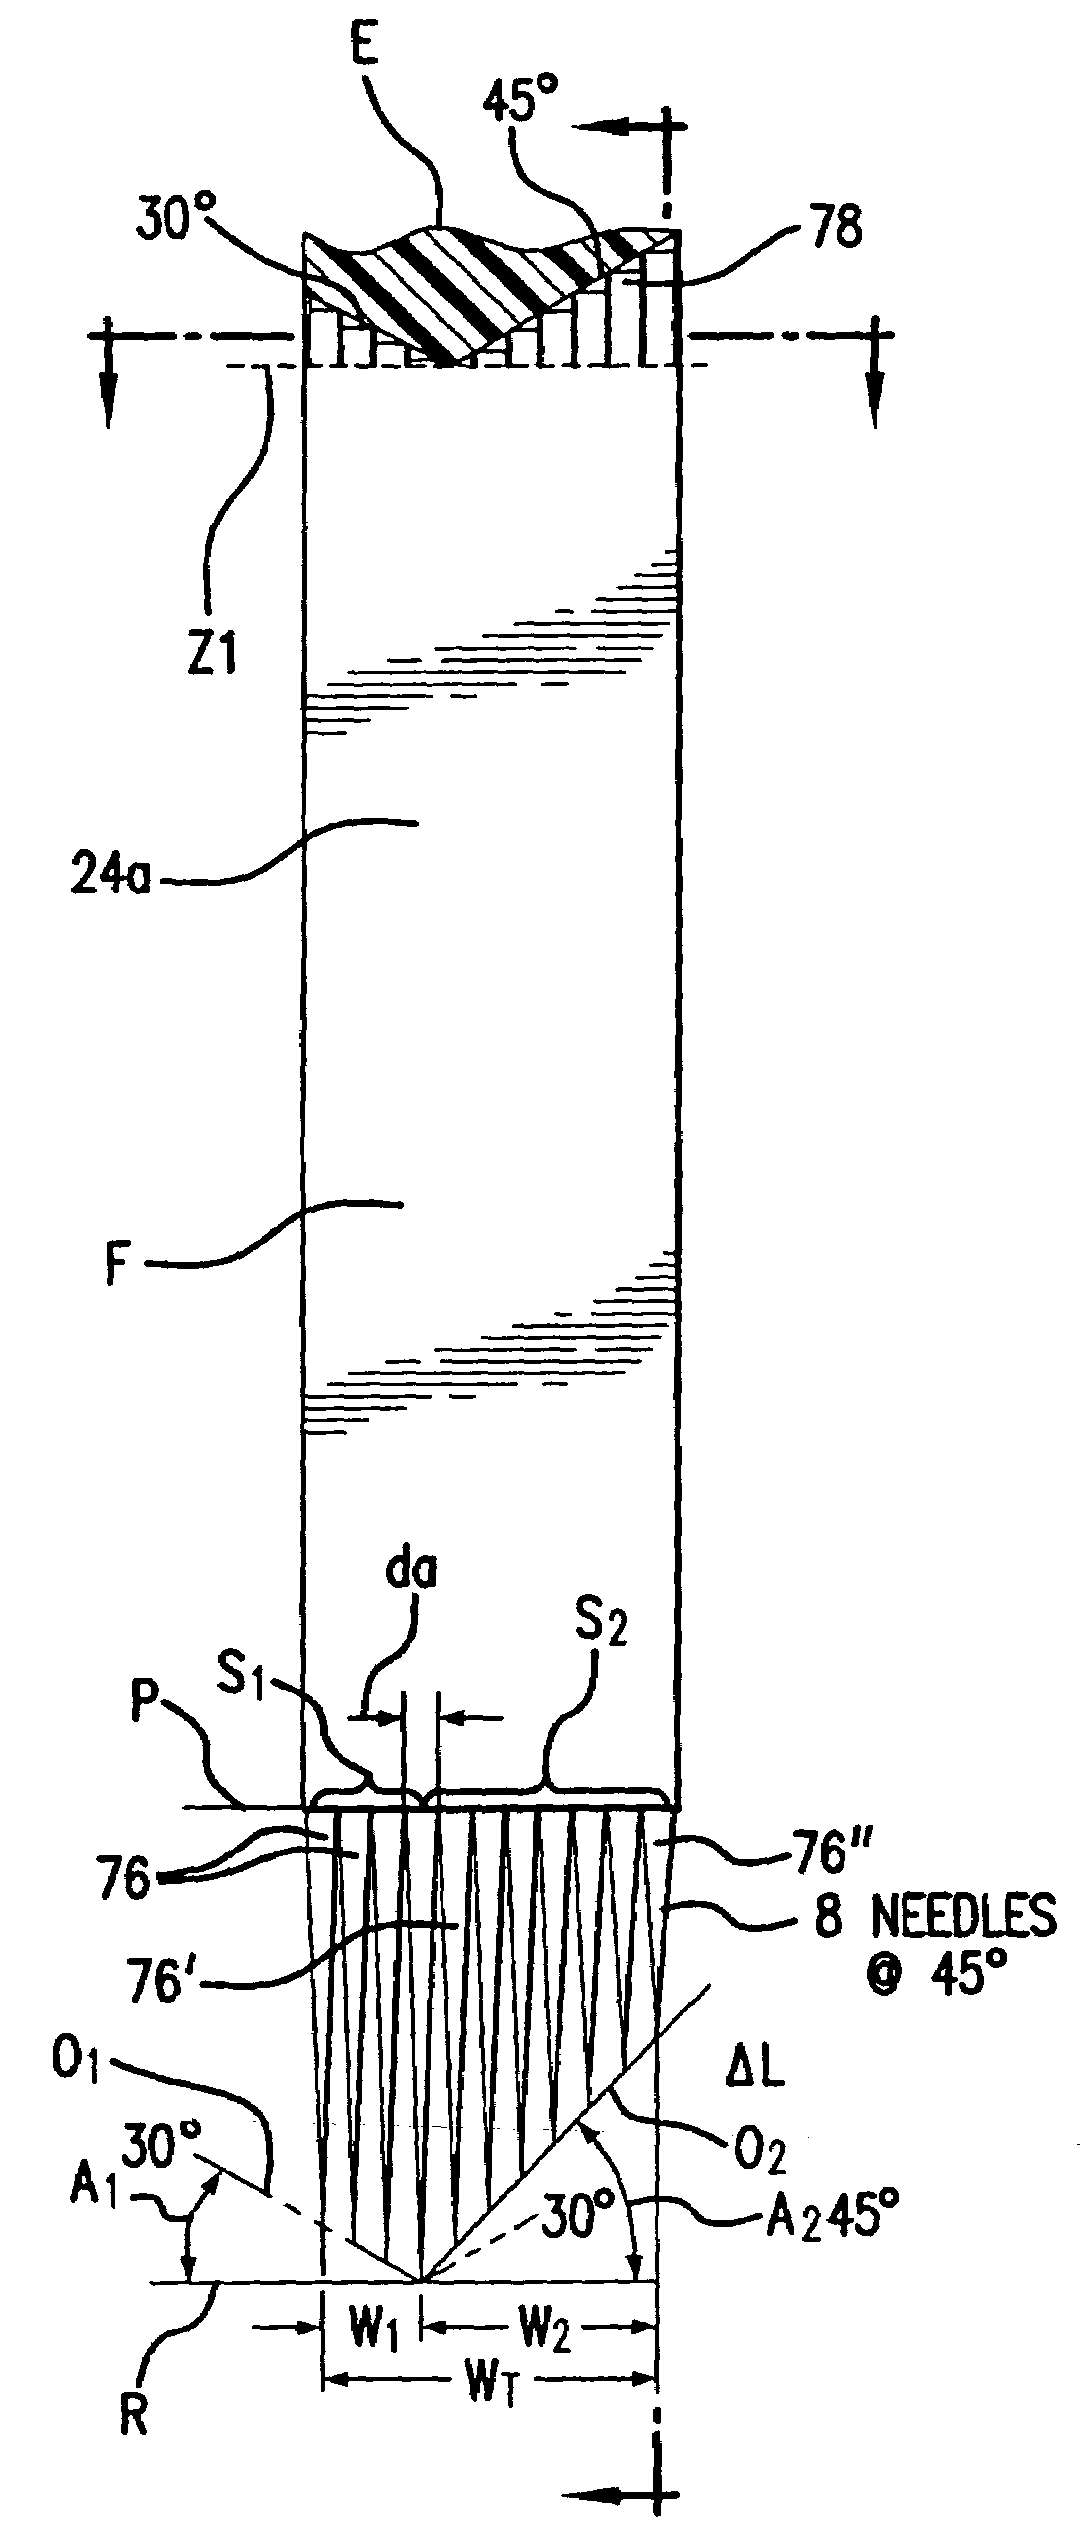 Intradermal color introducing needle device, and apparatus and method involving the same